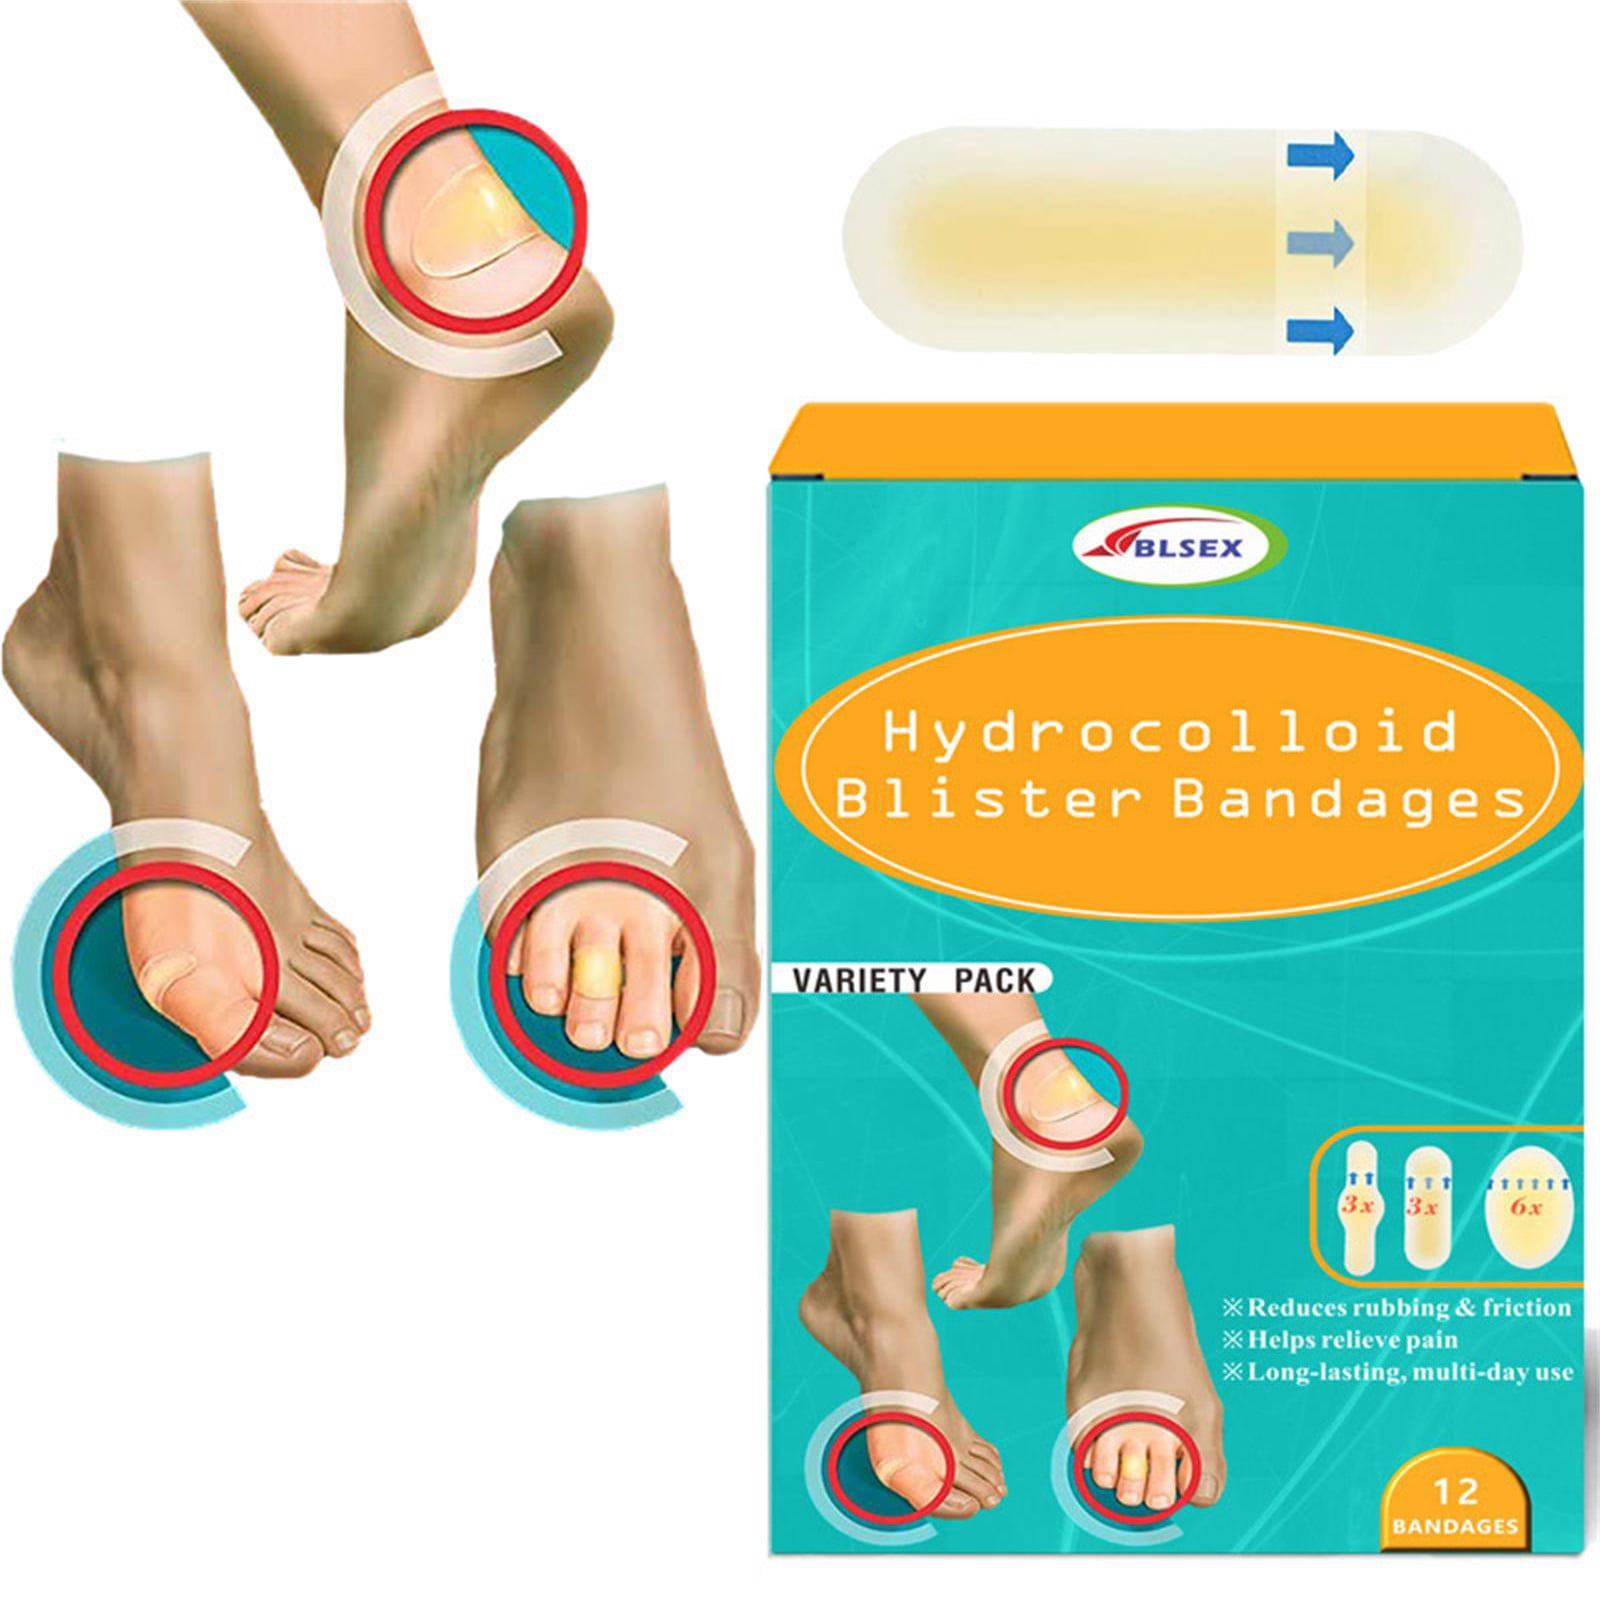 Sumifun Blister Pads 15 Packs Blister Bandages Waterproof Hydrocolloid Seal  Adhesive Blister Prevention for Heels Feet Toes Gel Blister Cushions 15packs